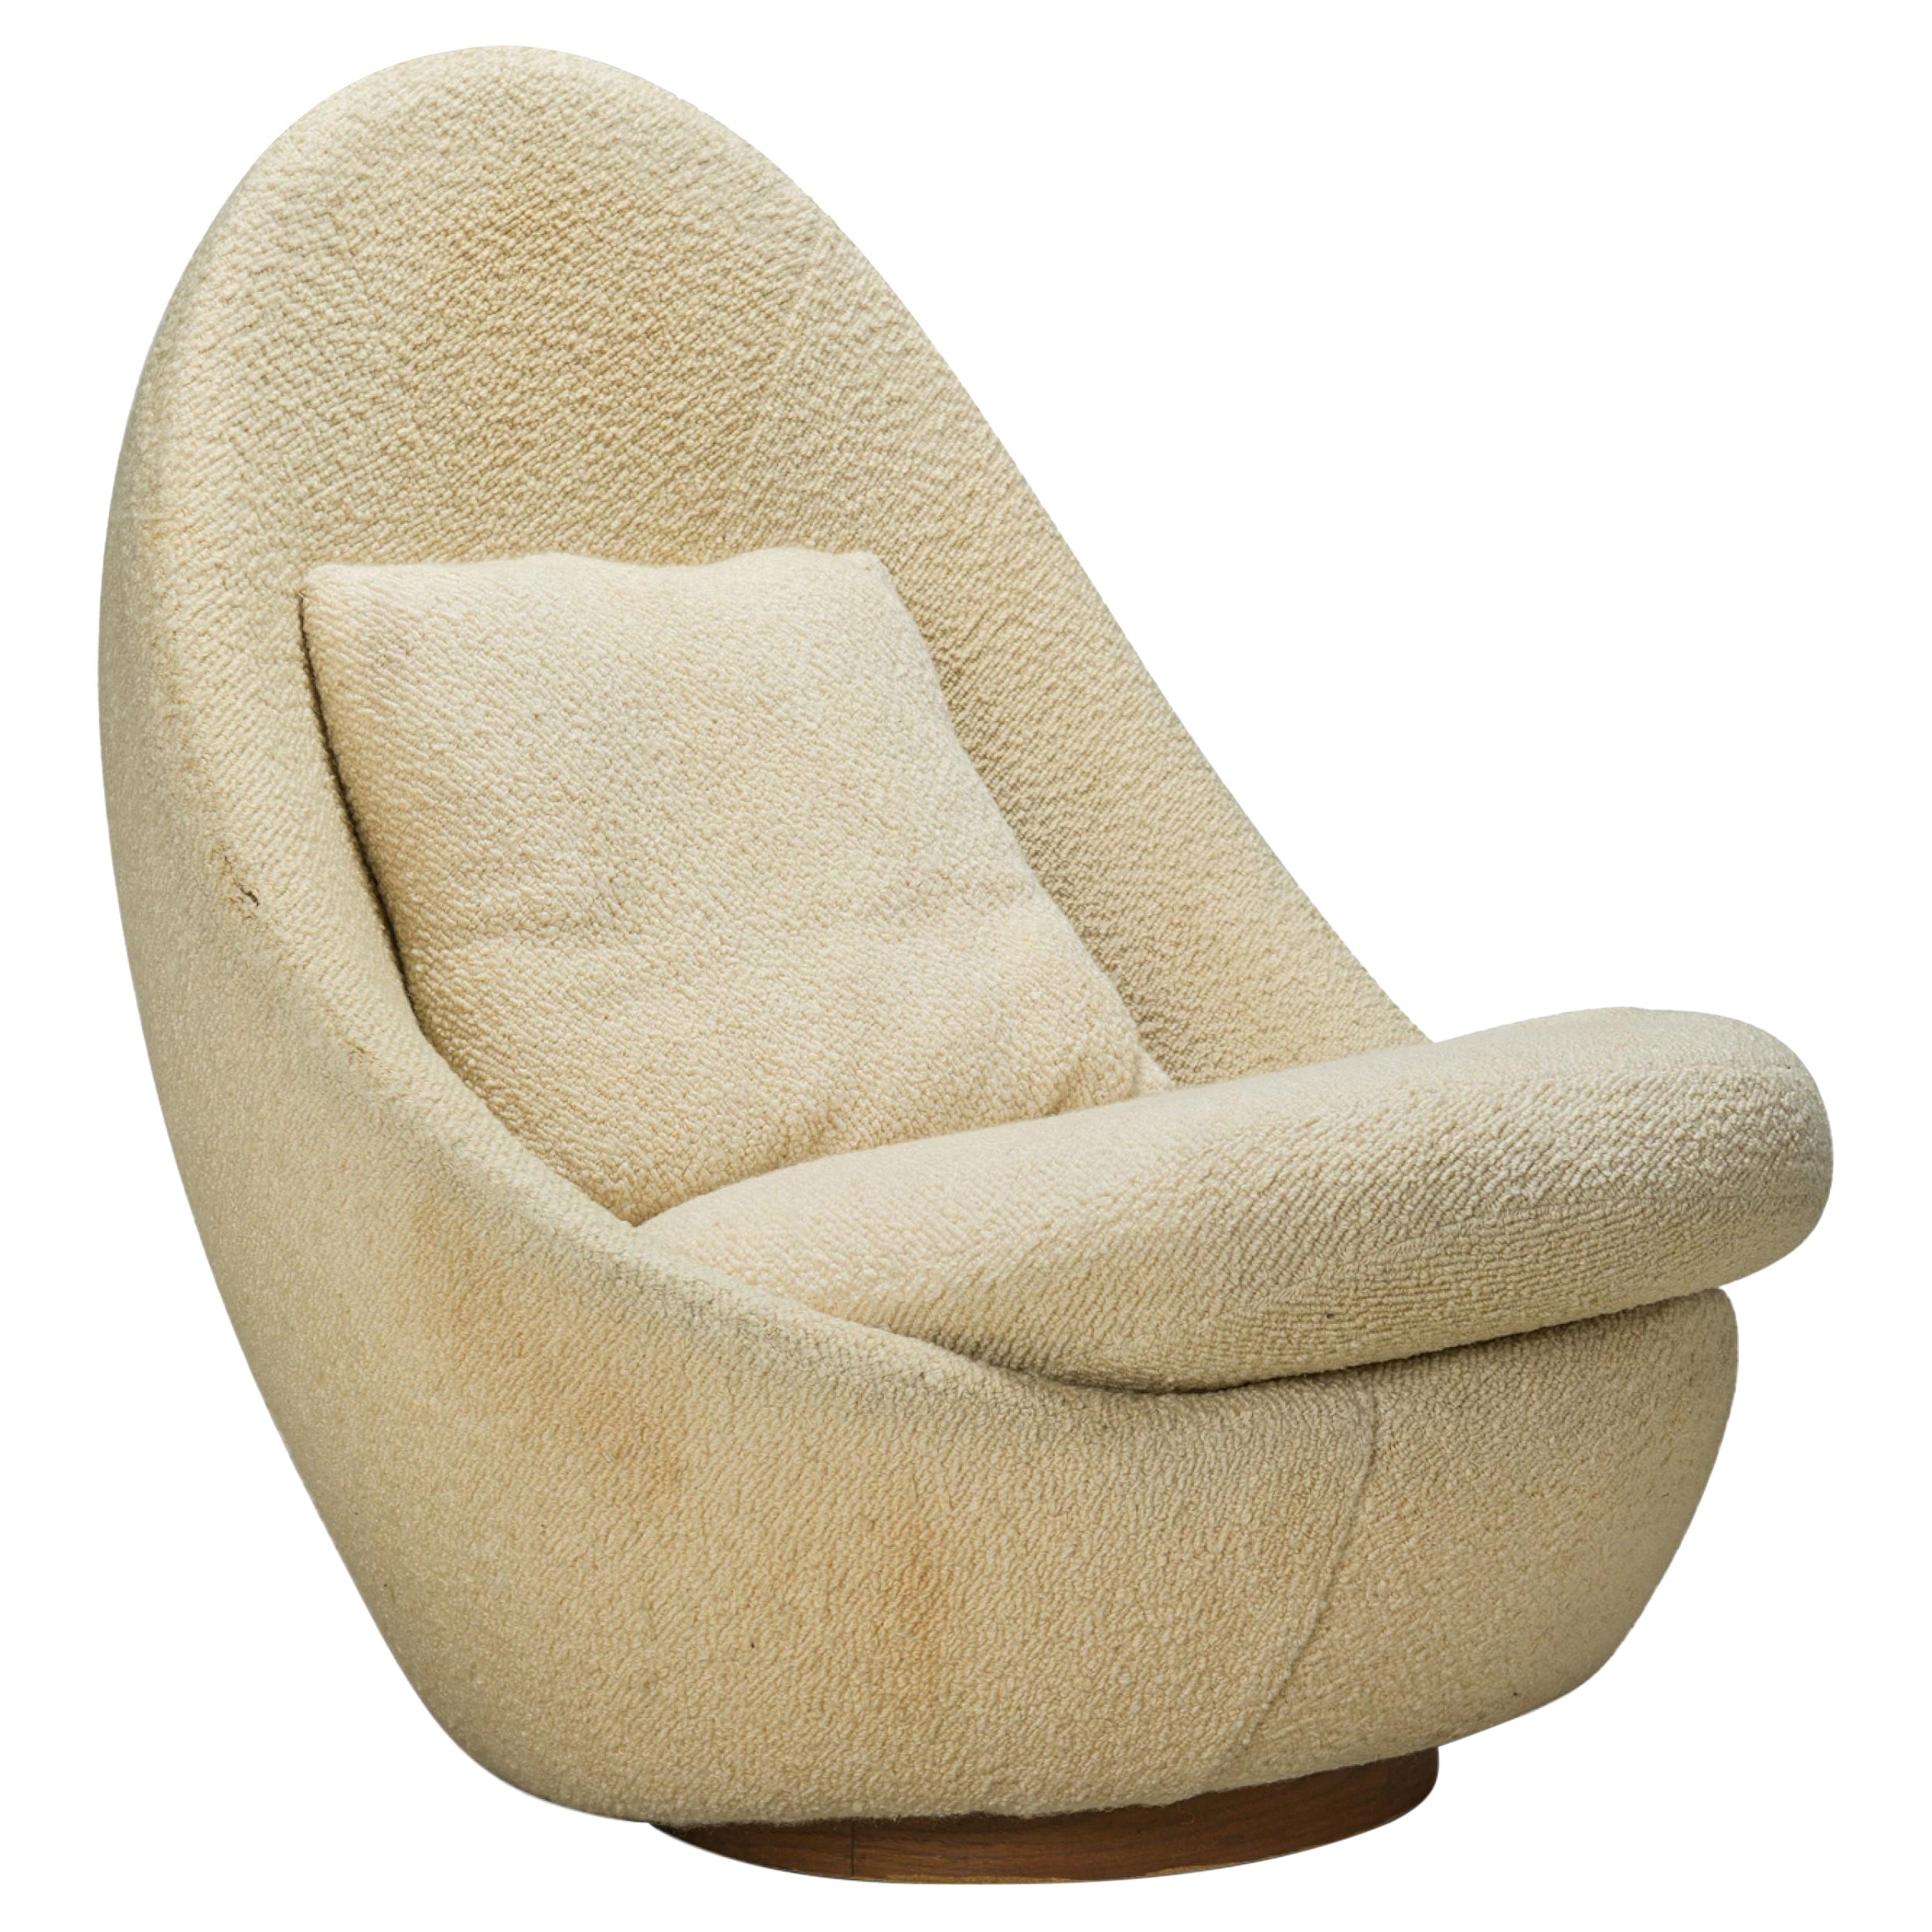 Milo Baughman American Mid-Century Beige Textured Upholstered Swivel Egg Chair For Sale